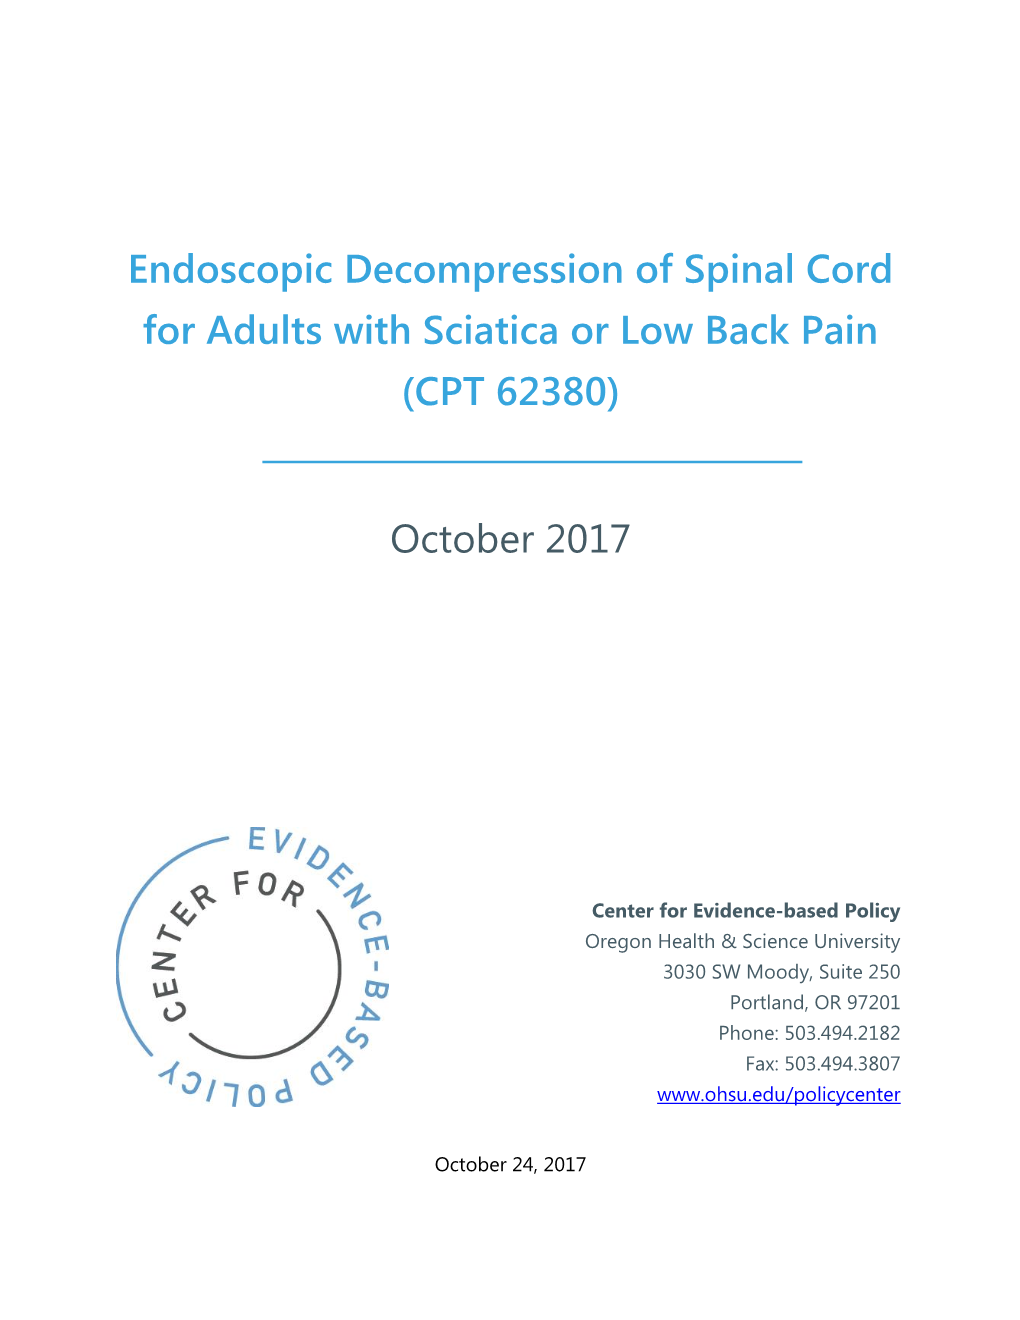 Endoscopic Decompression of Spinal Cord for Adults with Sciatica Or Low Back Pain (CPT 62380)